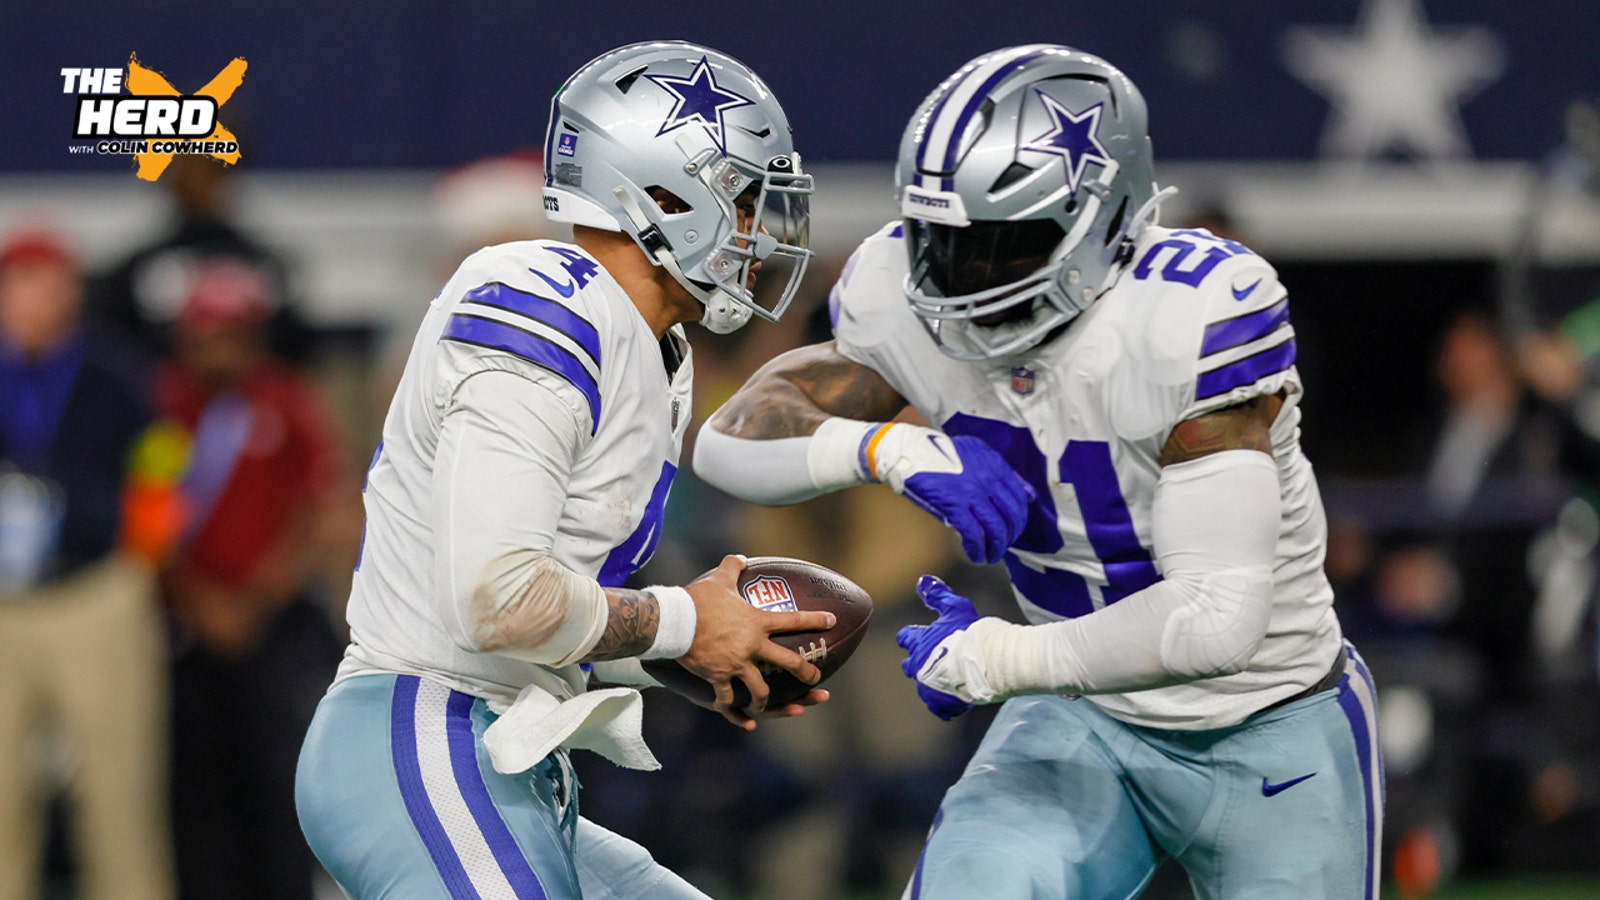 What Cowboys win vs. Eagles on Christmas Eve says America's Team 